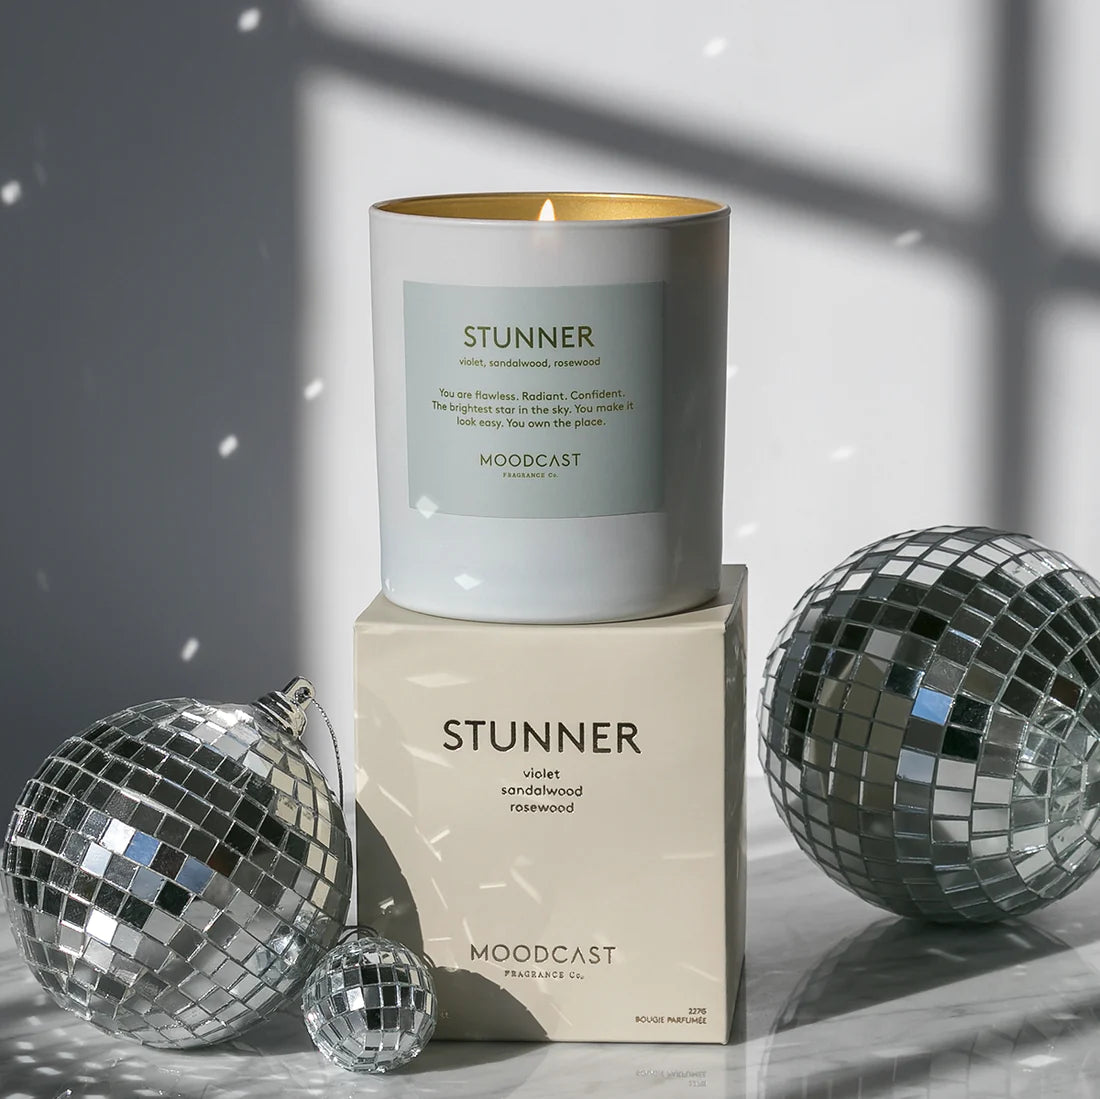 Moodcast Stunner Candle